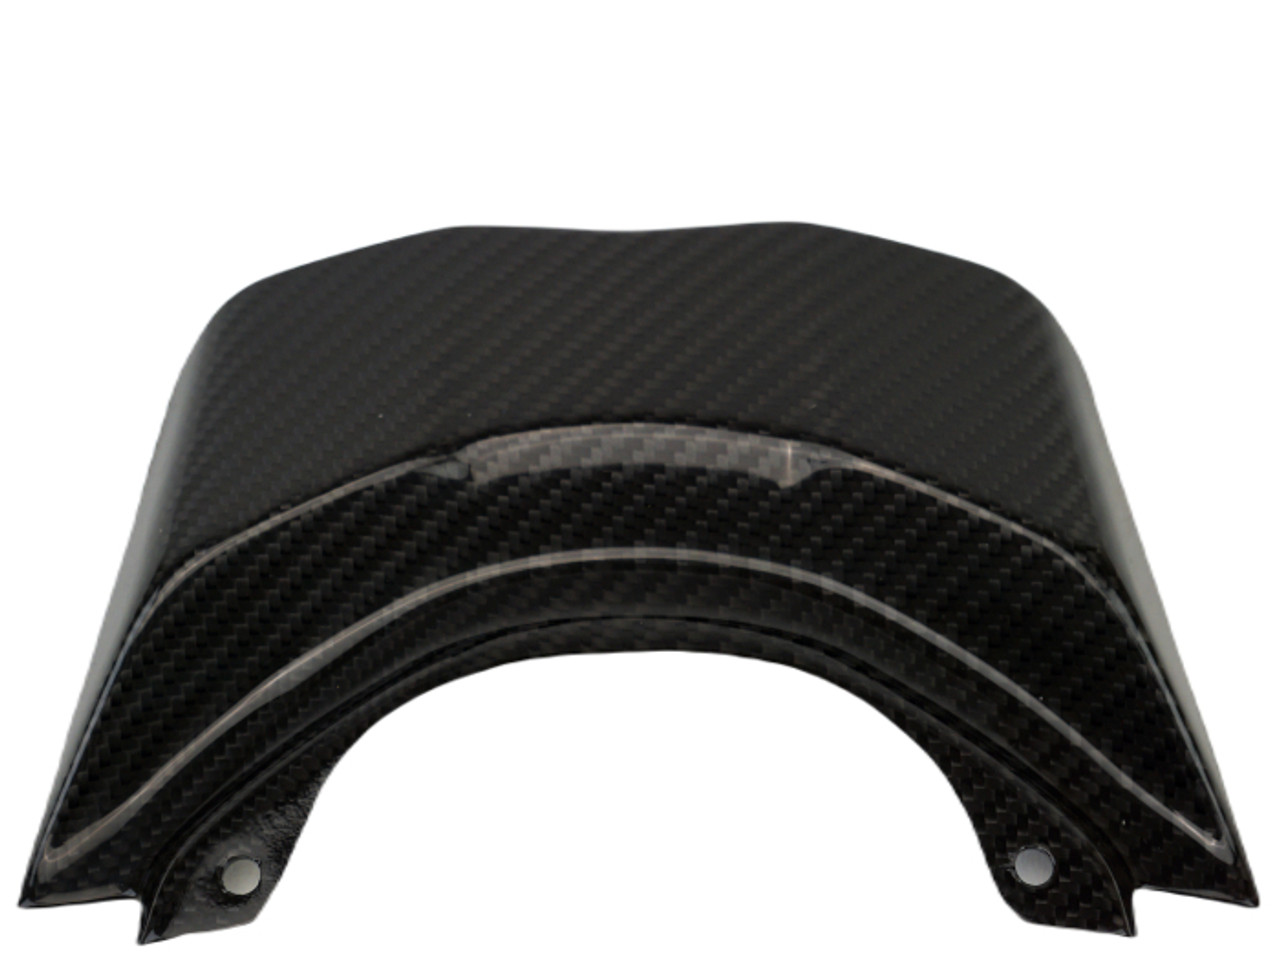 Tail Cover in Glossy Twill Weave Carbon Fiber for Yamaha MT-10 2022+